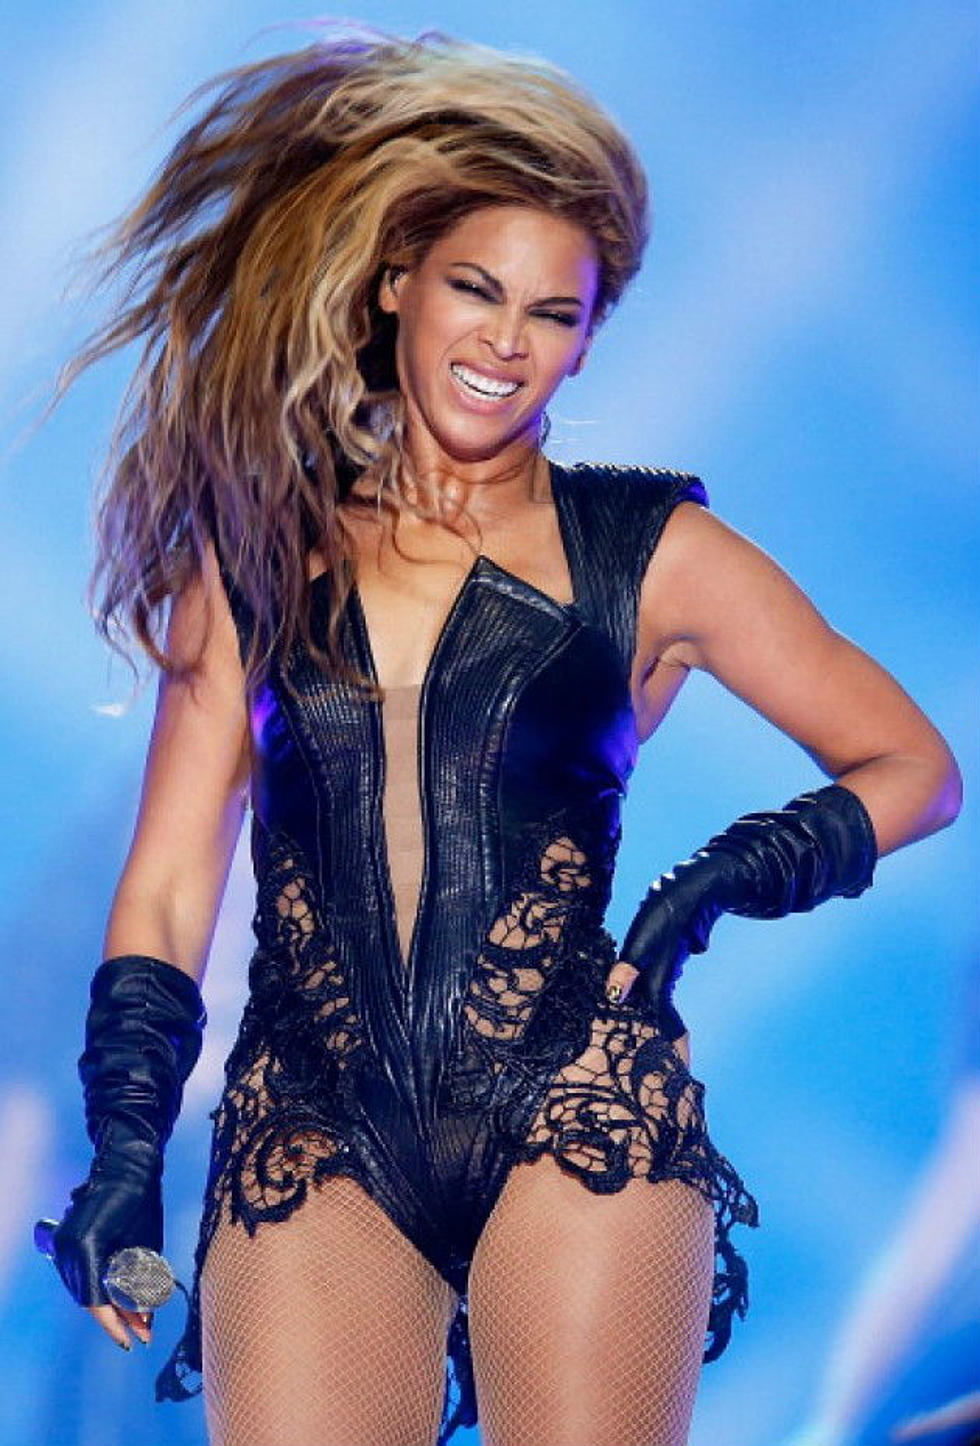 Beyonce’s Publicist Wants the Internet to Magically Erase Her Awkward Face [PHOTOS]